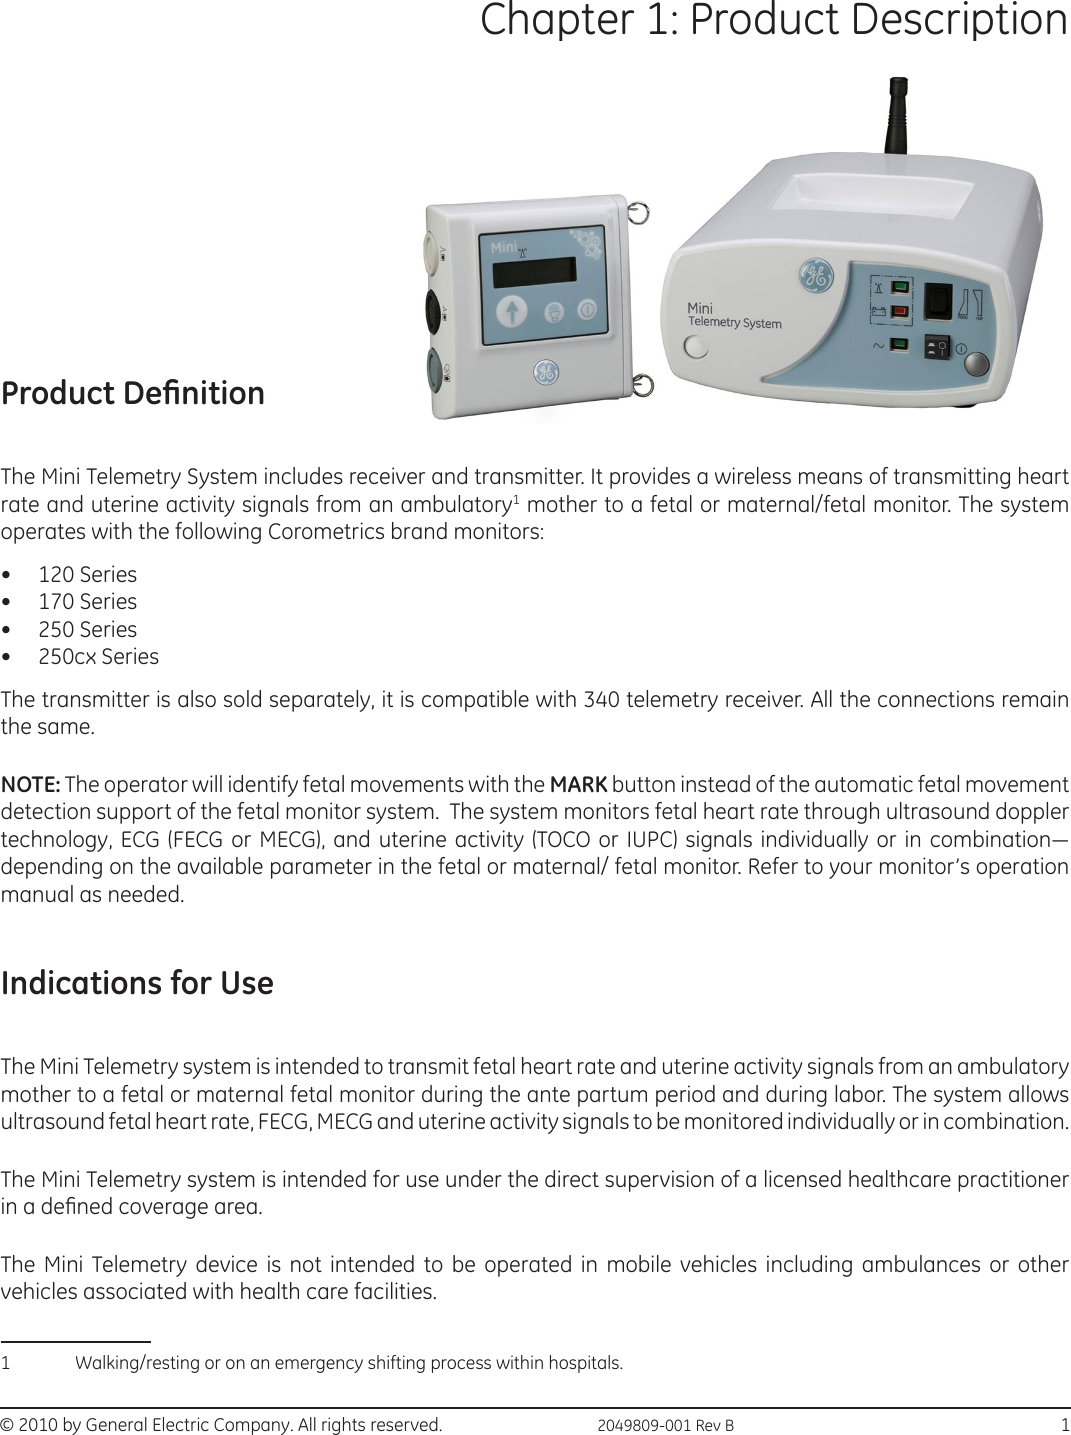 © 2010 by General Electric Company. All rights reserved.  2049809-001 Rev B                                                                           1Chapter 1: Product Description Product DenitionThe Mini Telemetry System includes receiver and transmitter. It provides a wireless means of transmitting heart rate and uterine activity signals from an ambulatory1 mother to a fetal or maternal/fetal monitor. The system operates with the following Corometrics brand monitors:•  120 Series•  170 Series•  250 Series•  250cx SeriesThe transmitter is also sold separately, it is compatible with 340 telemetry receiver. All the connections remain the same. NOTE: The operator will identify fetal movements with the MARK button instead of the automatic fetal movement detection support of the fetal monitor system.  The system monitors fetal heart rate through ultrasound doppler technology, ECG (FECG or MECG), and uterine activity (TOCO or  IUPC) signals individually or in combination— depending on the available parameter in the fetal or maternal/ fetal monitor. Refer to your monitor’s operation manual as needed.Indications for UseThe Mini Telemetry system is intended to transmit fetal heart rate and uterine activity signals from an ambulatory mother to a fetal or maternal fetal monitor during the ante partum period and during labor. The system allows ultrasound fetal heart rate, FECG, MECG and uterine activity signals to be monitored individually or in combination.The Mini Telemetry system is intended for use under the direct supervision of a licensed healthcare practitioner in a dened coverage area.The Mini Telemetry device is not intended to be operated in mobile vehicles including ambulances or other vehicles associated with health care facilities. 1 Walking/resting or on an emergency shifting process within hospitals.